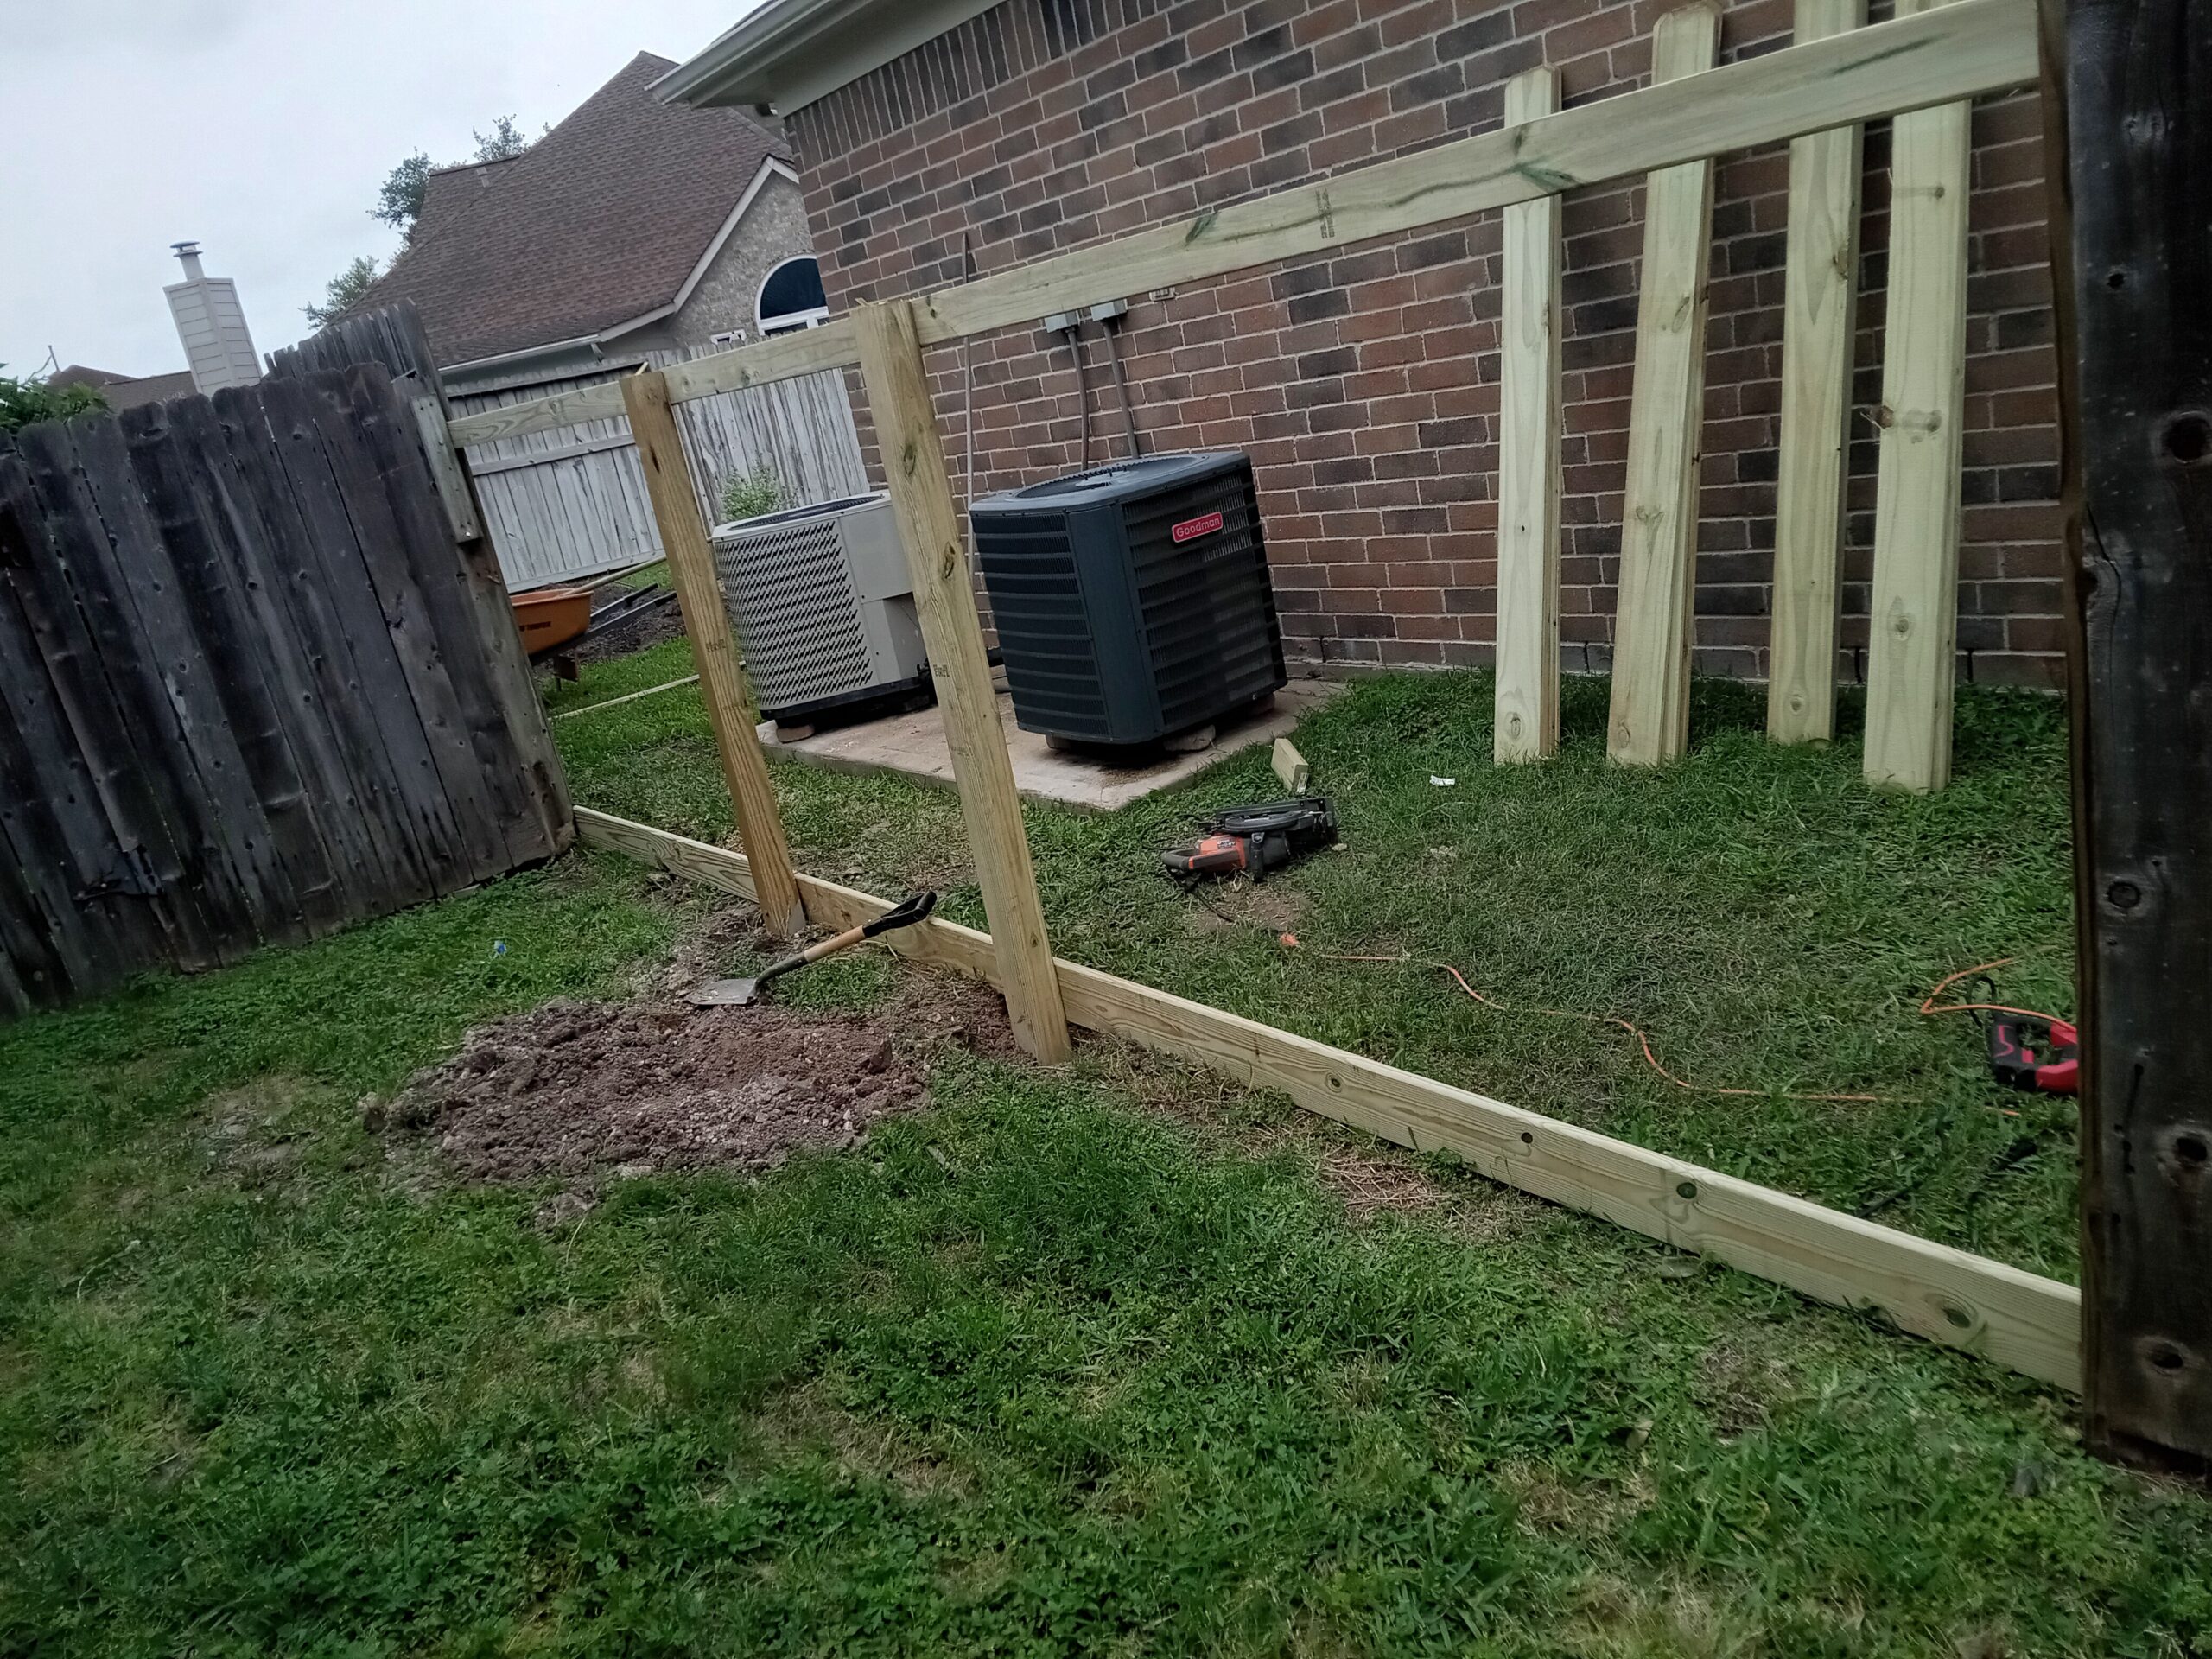 An unfinished wooden fence repair in progress in a Houston backyard. Two new fence posts have been erected and are supported by temporary braces, standing beside a section of old, weathered fence that remains upright. Excavated soil is visible at the base of the new posts.